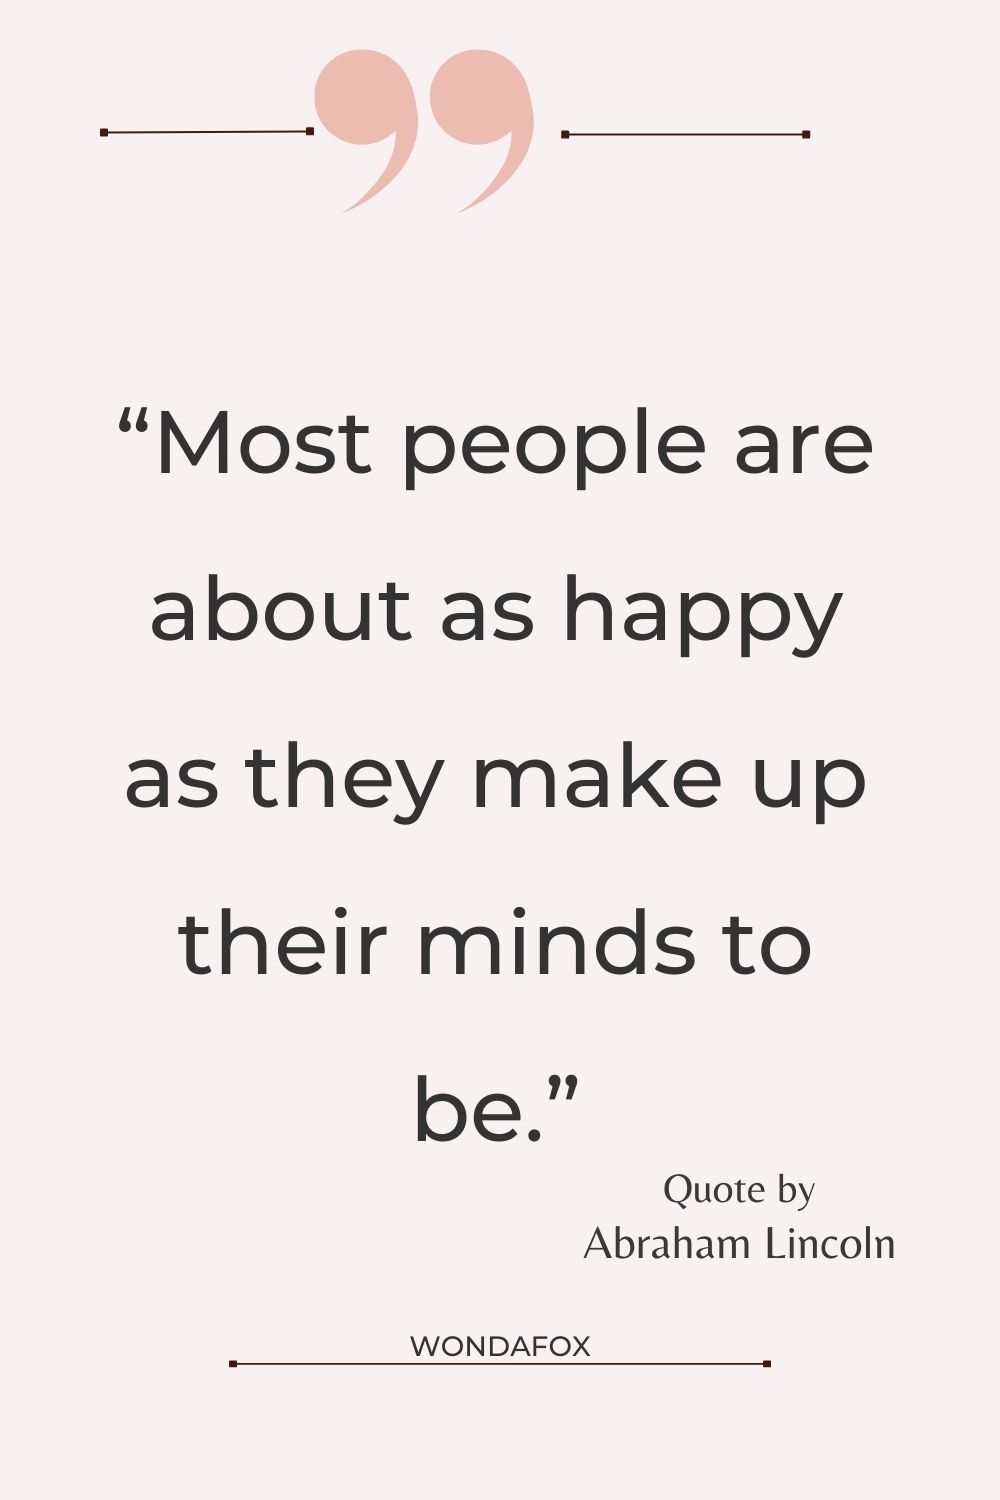 “Most people are about as happy as they make up their minds to be.”
Abraham Lincoln